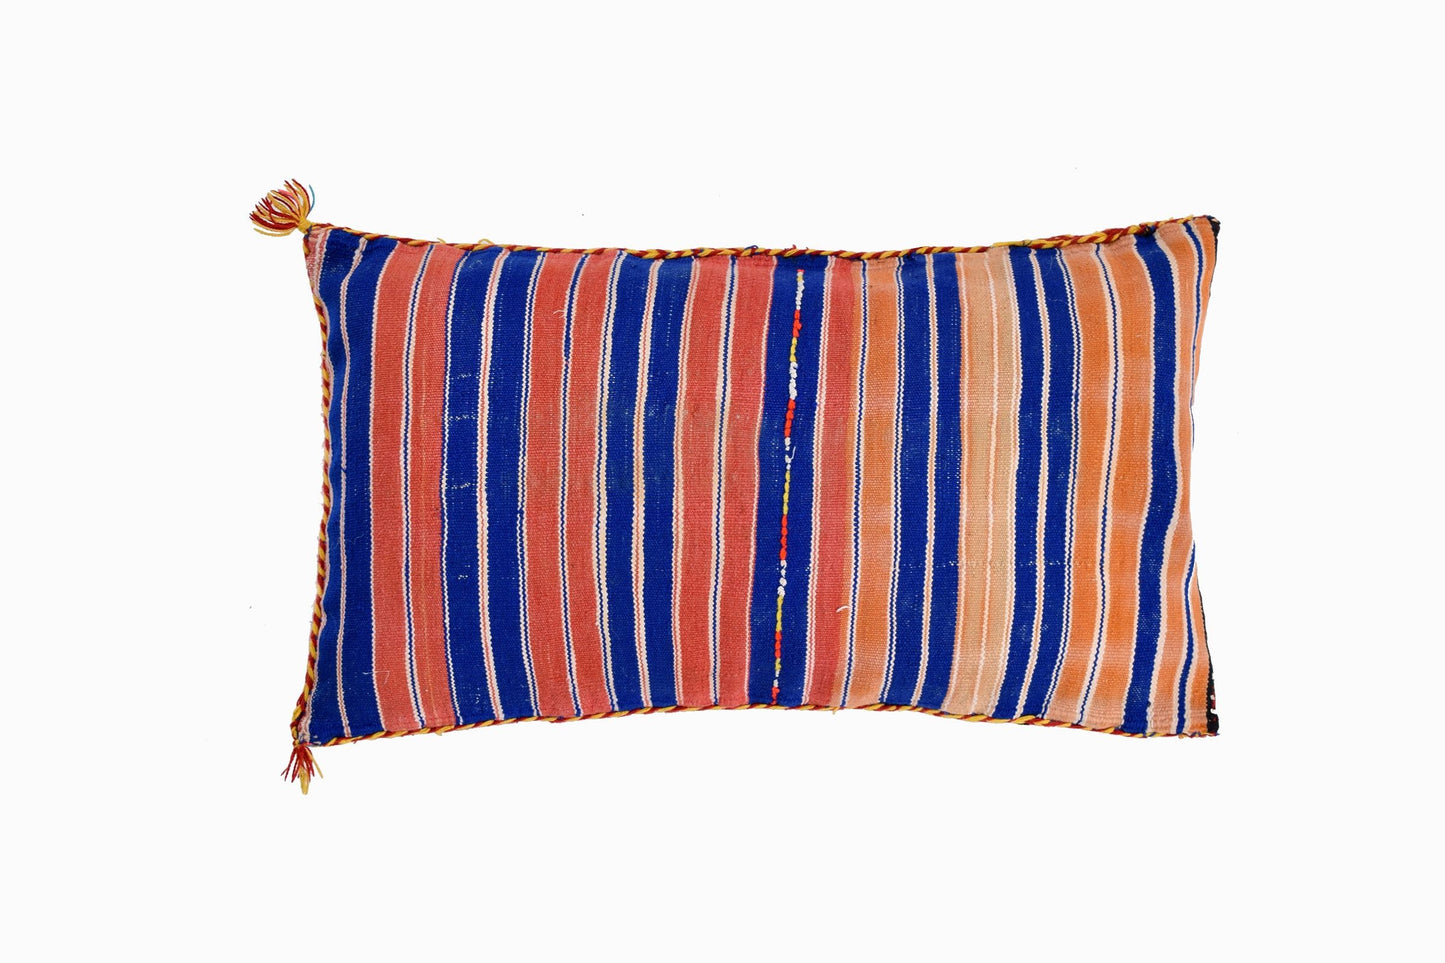 MOROCCAN EMBROIDERED CUSHION REF 1